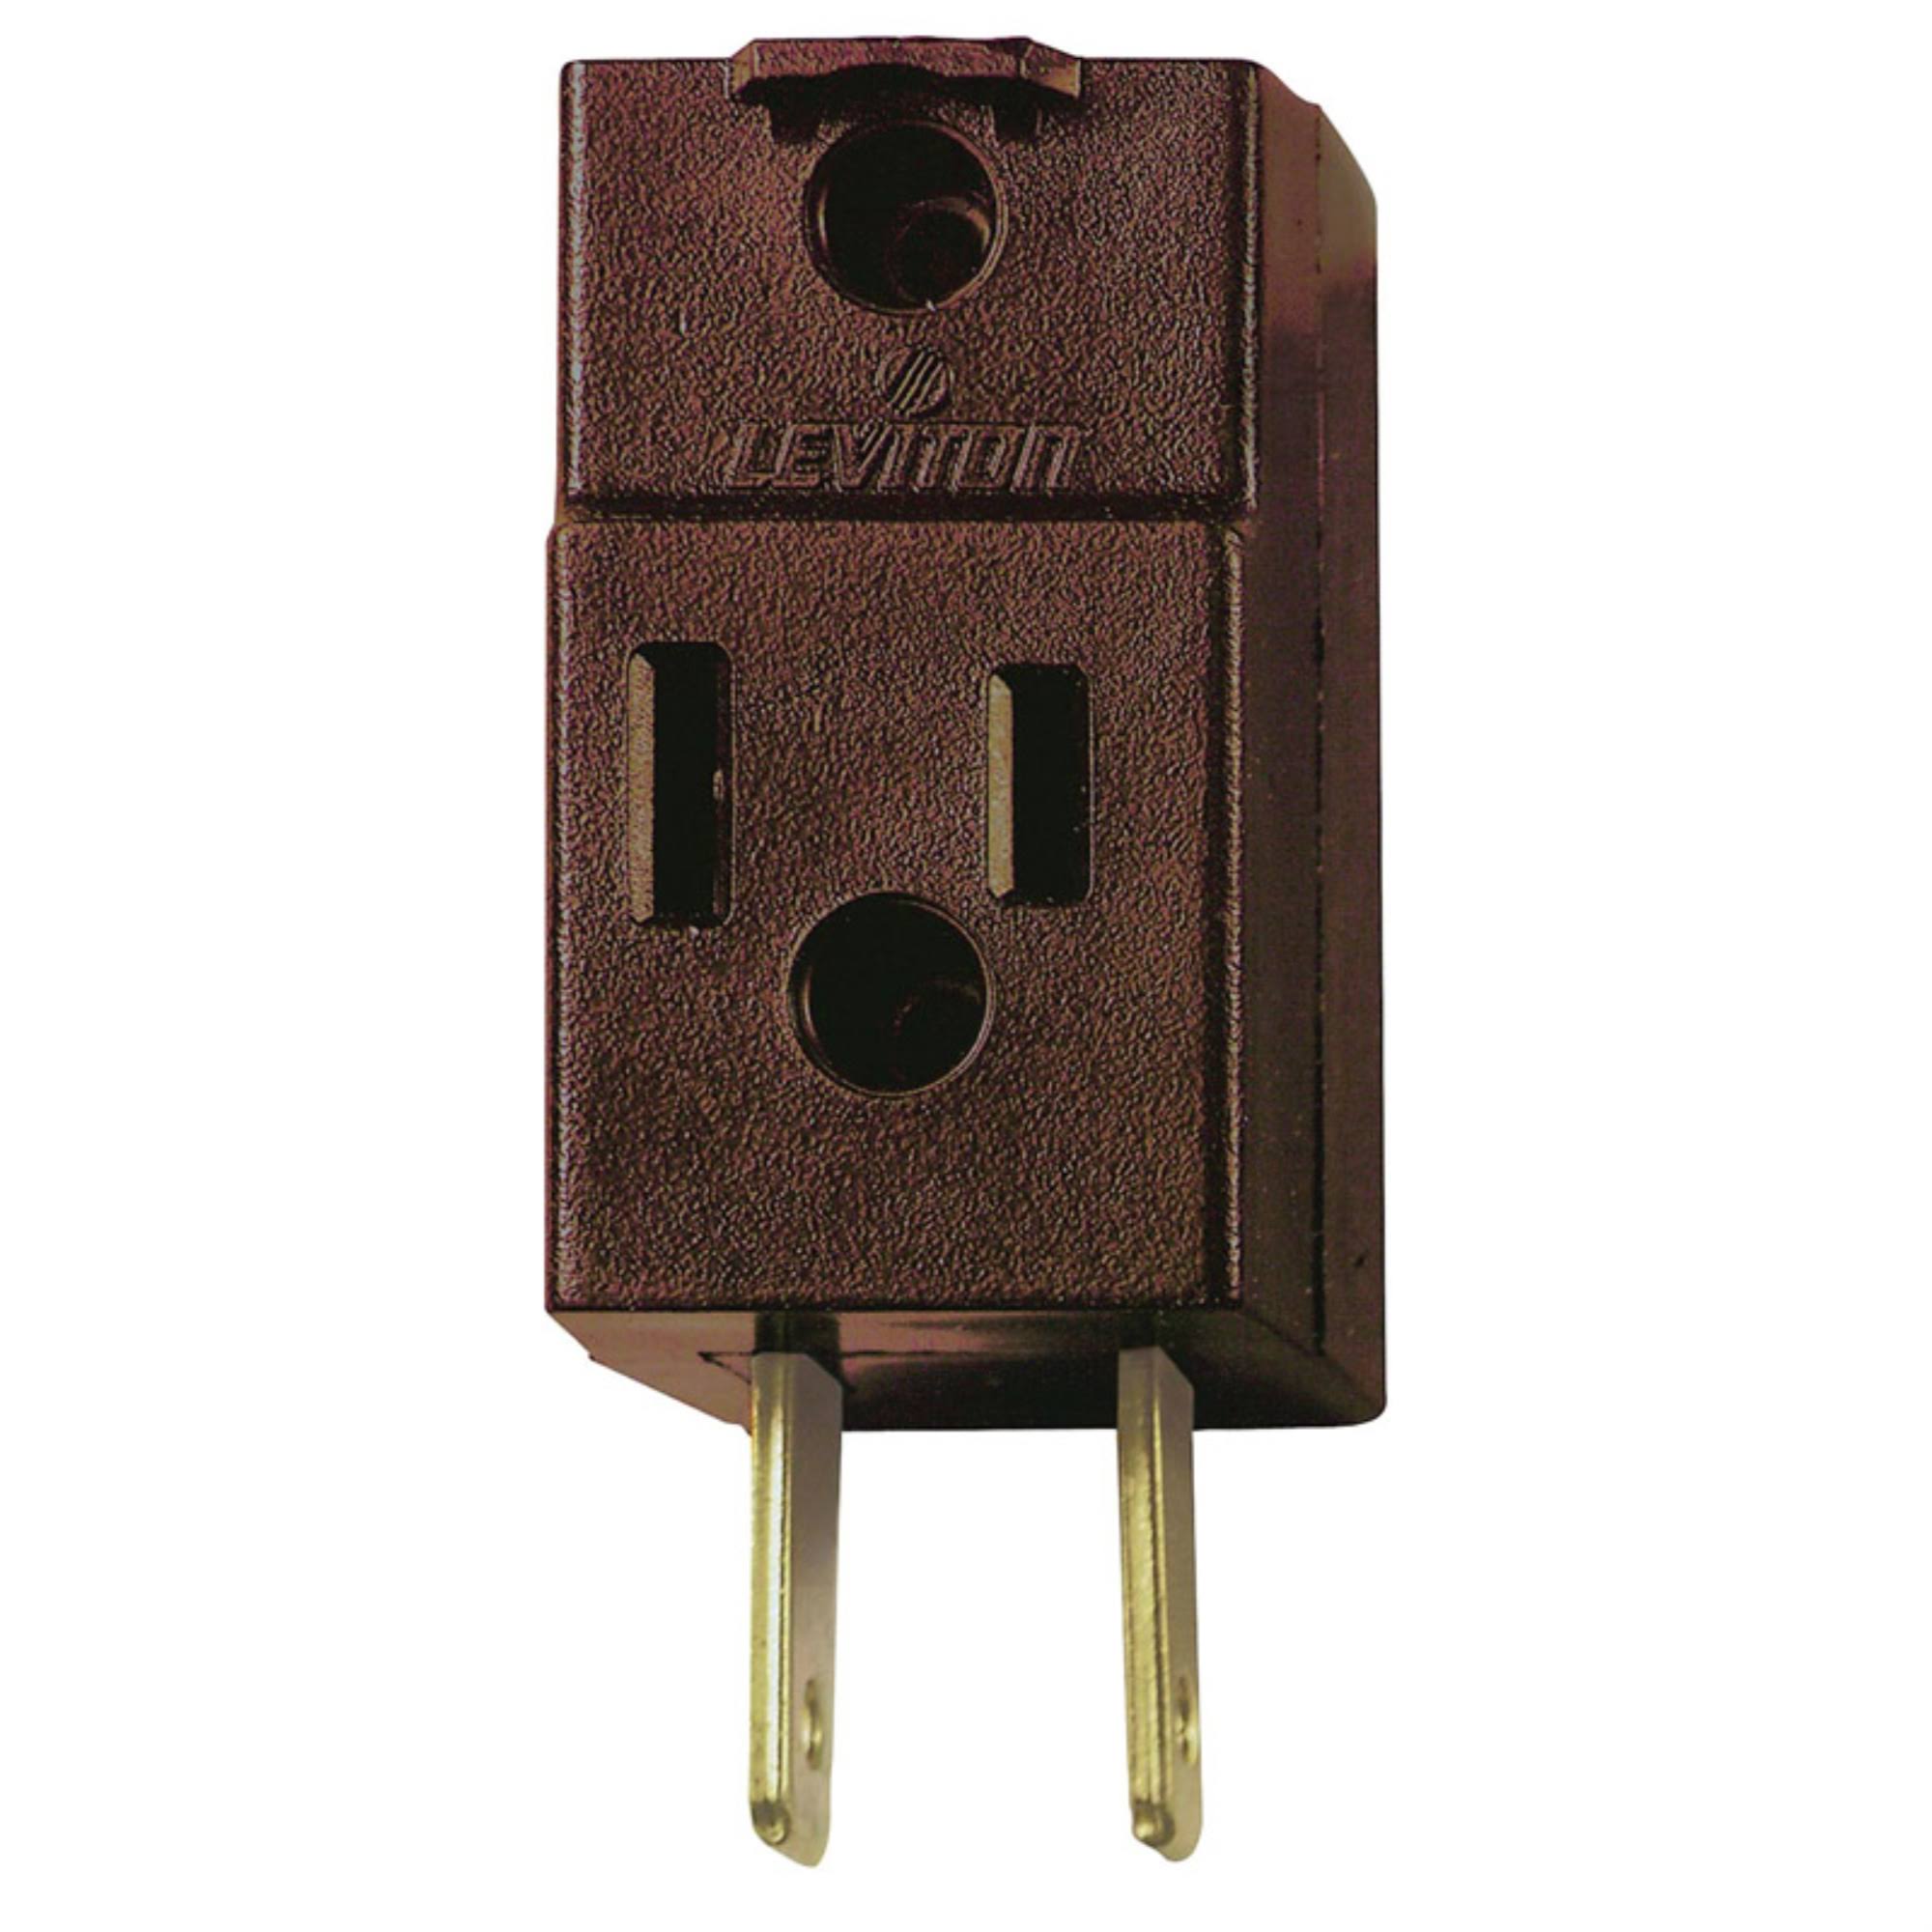 Leviton 000-00531-000 Non-Grounded Outlet Cube Adapter, 15 A, 2-pole, 3-outlet, Brown